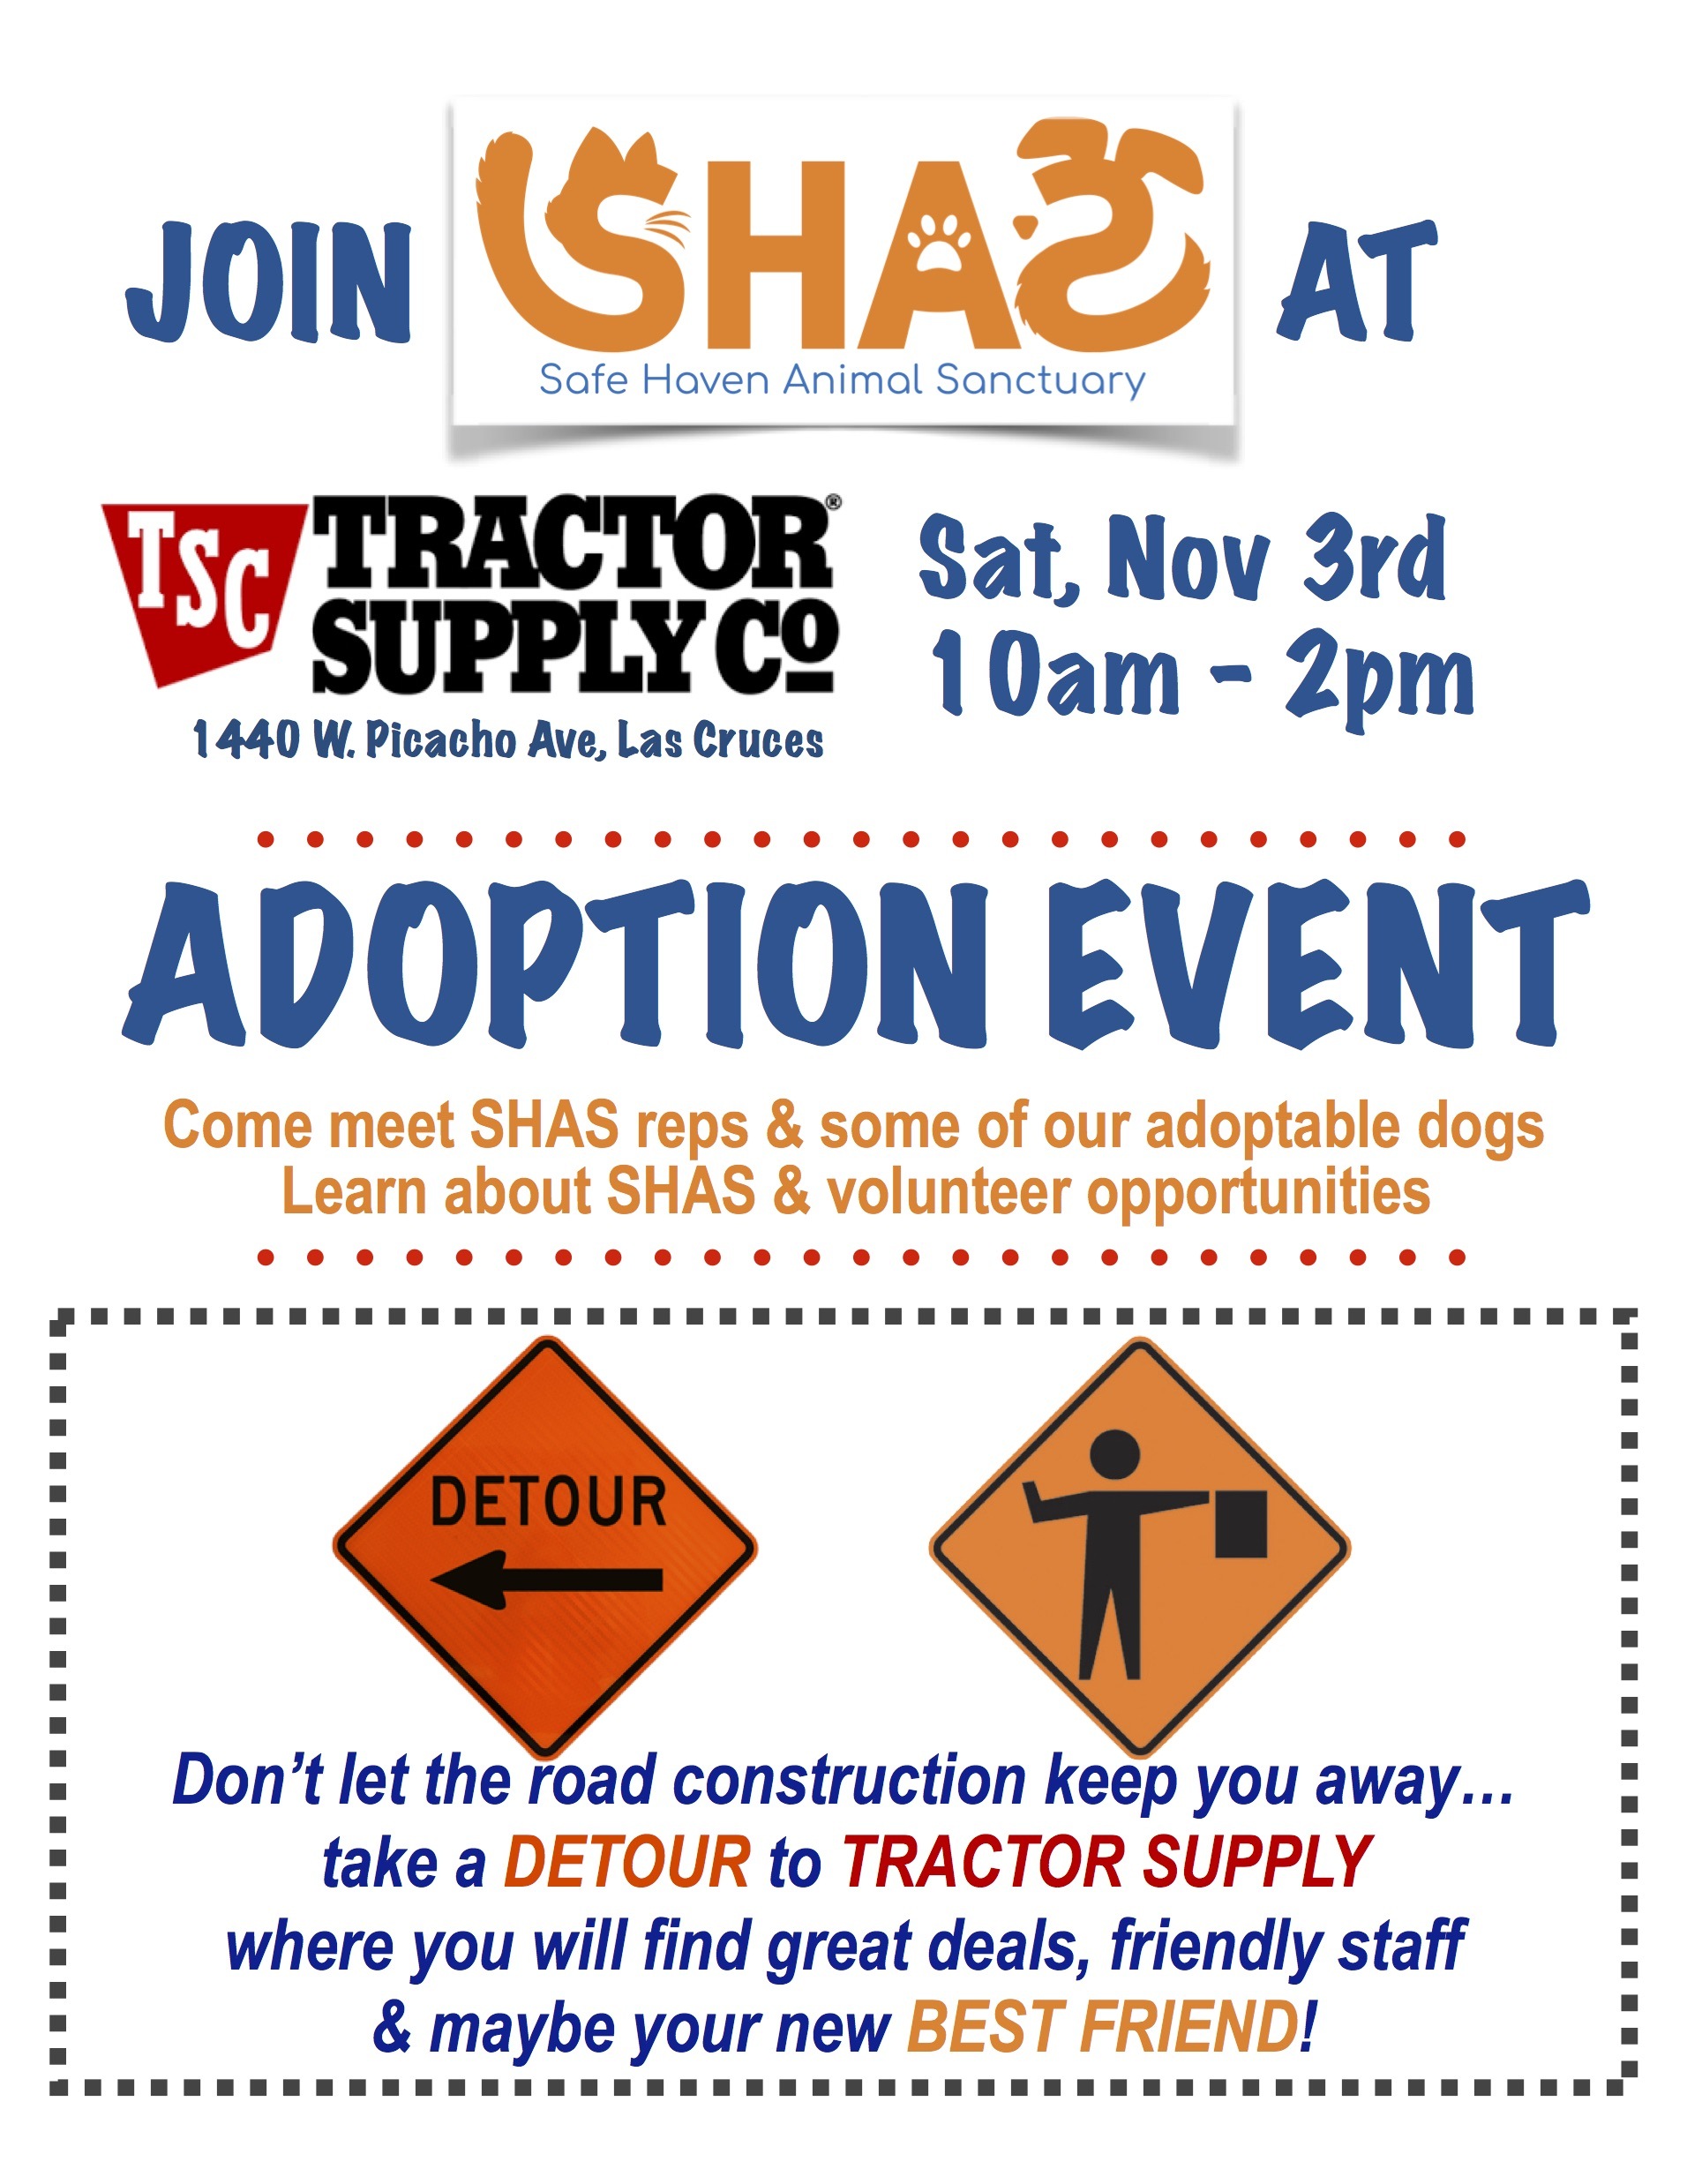 Tractor Supply Adoptions Safe Haven Animal Sanctuary